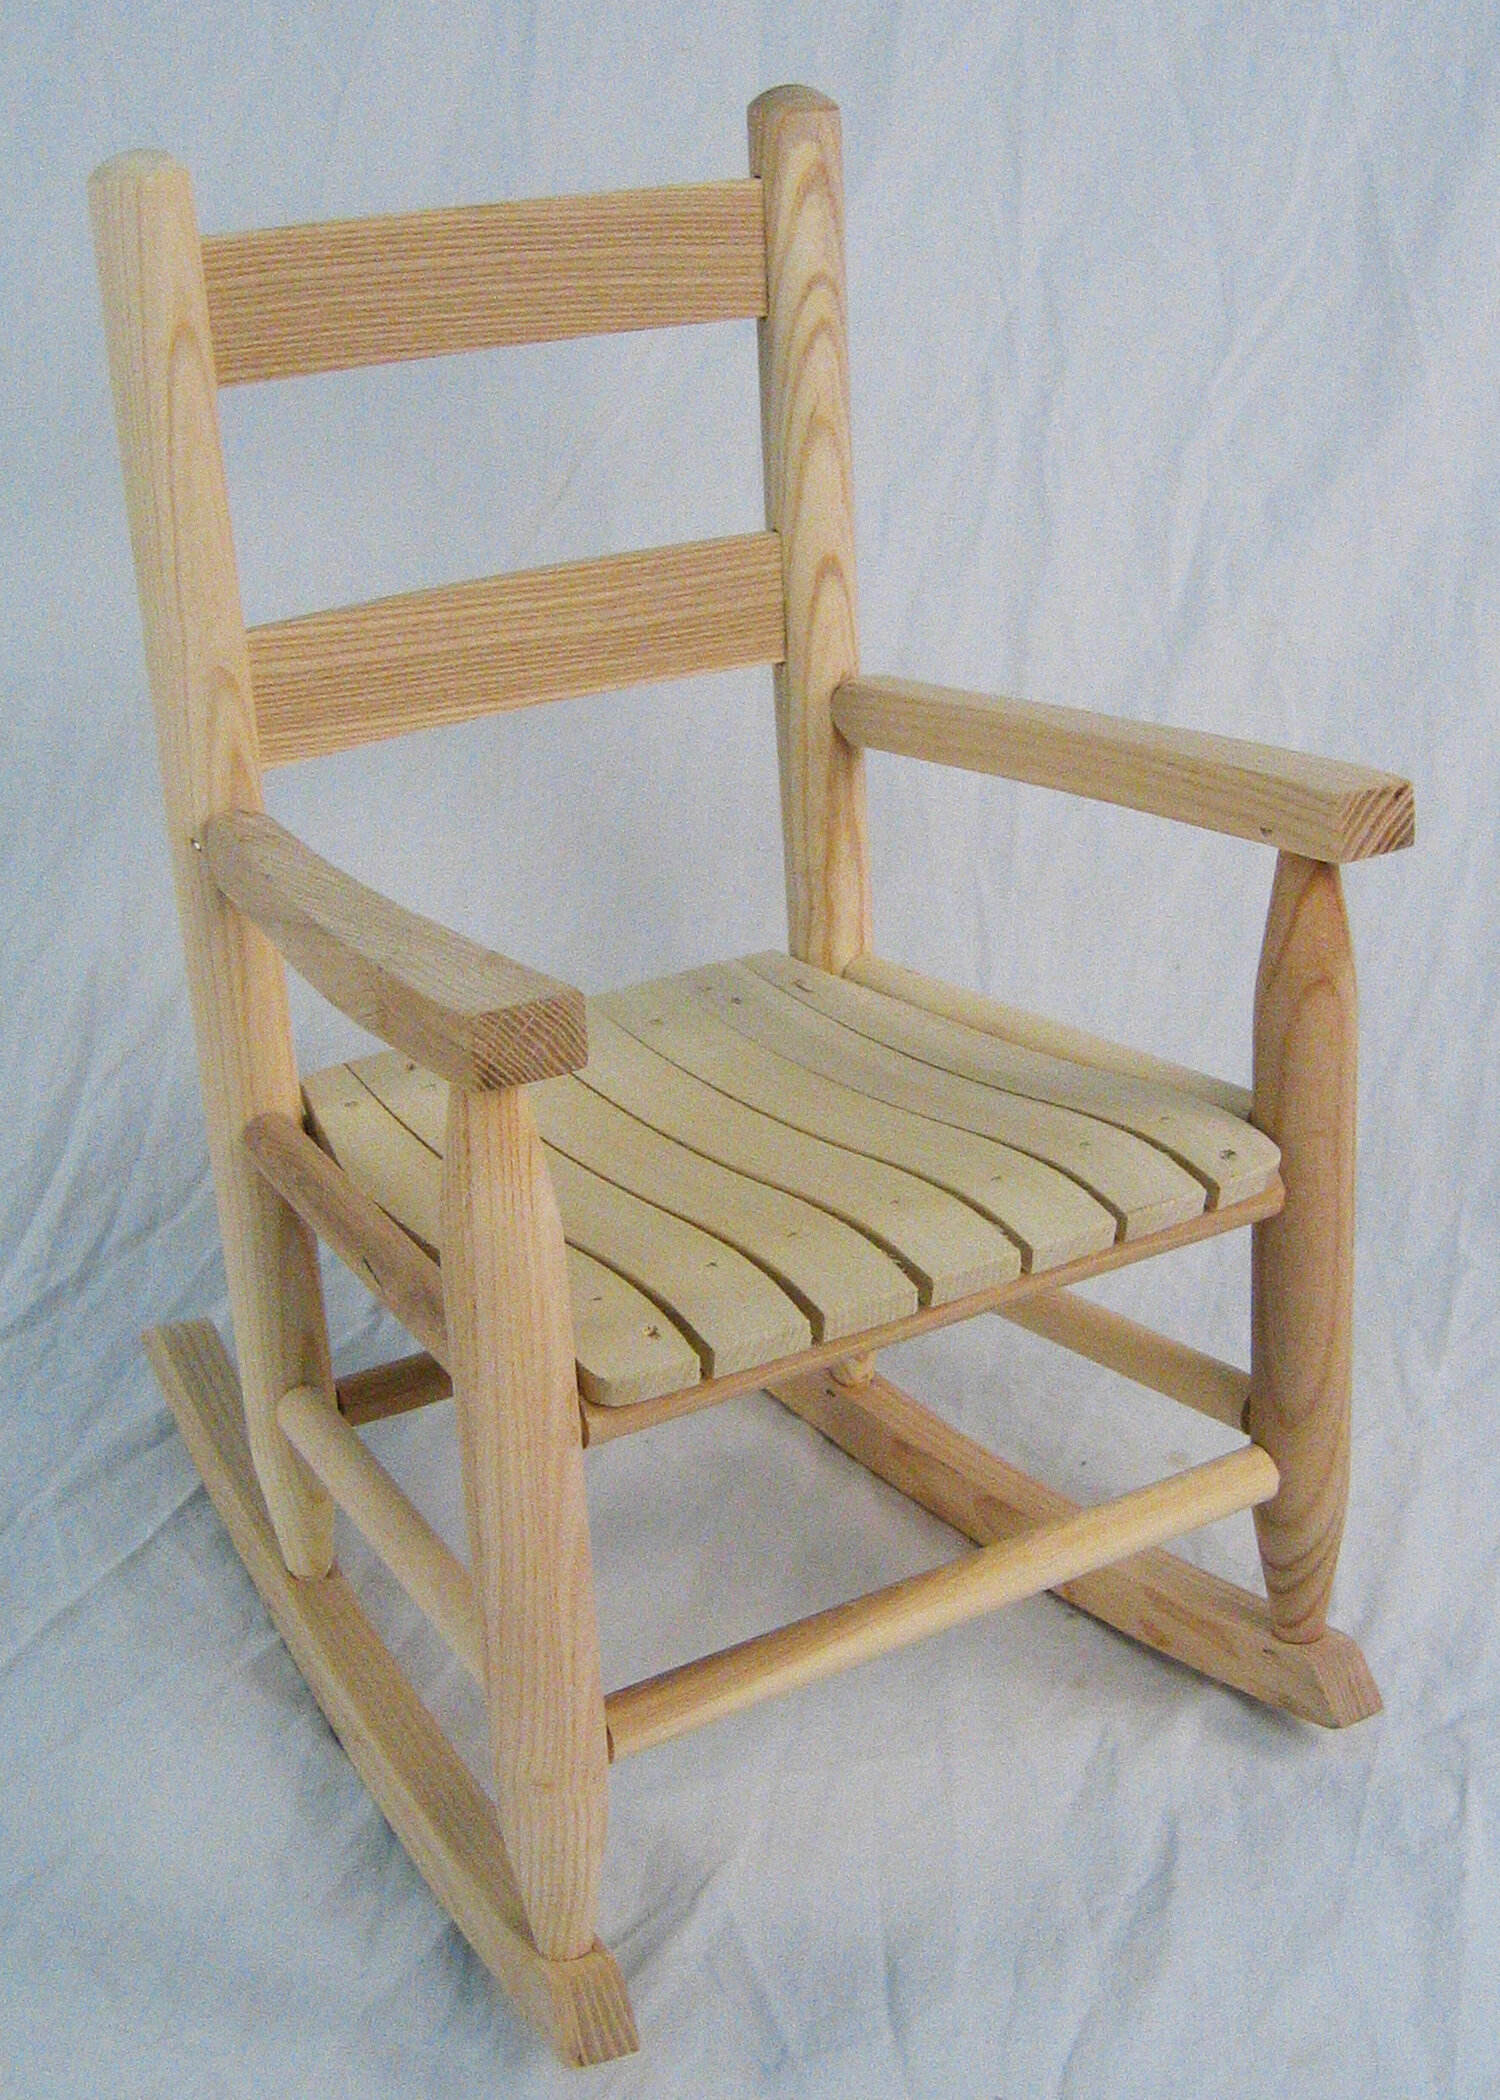 Child's Rocking Chair Finish: Unfinished